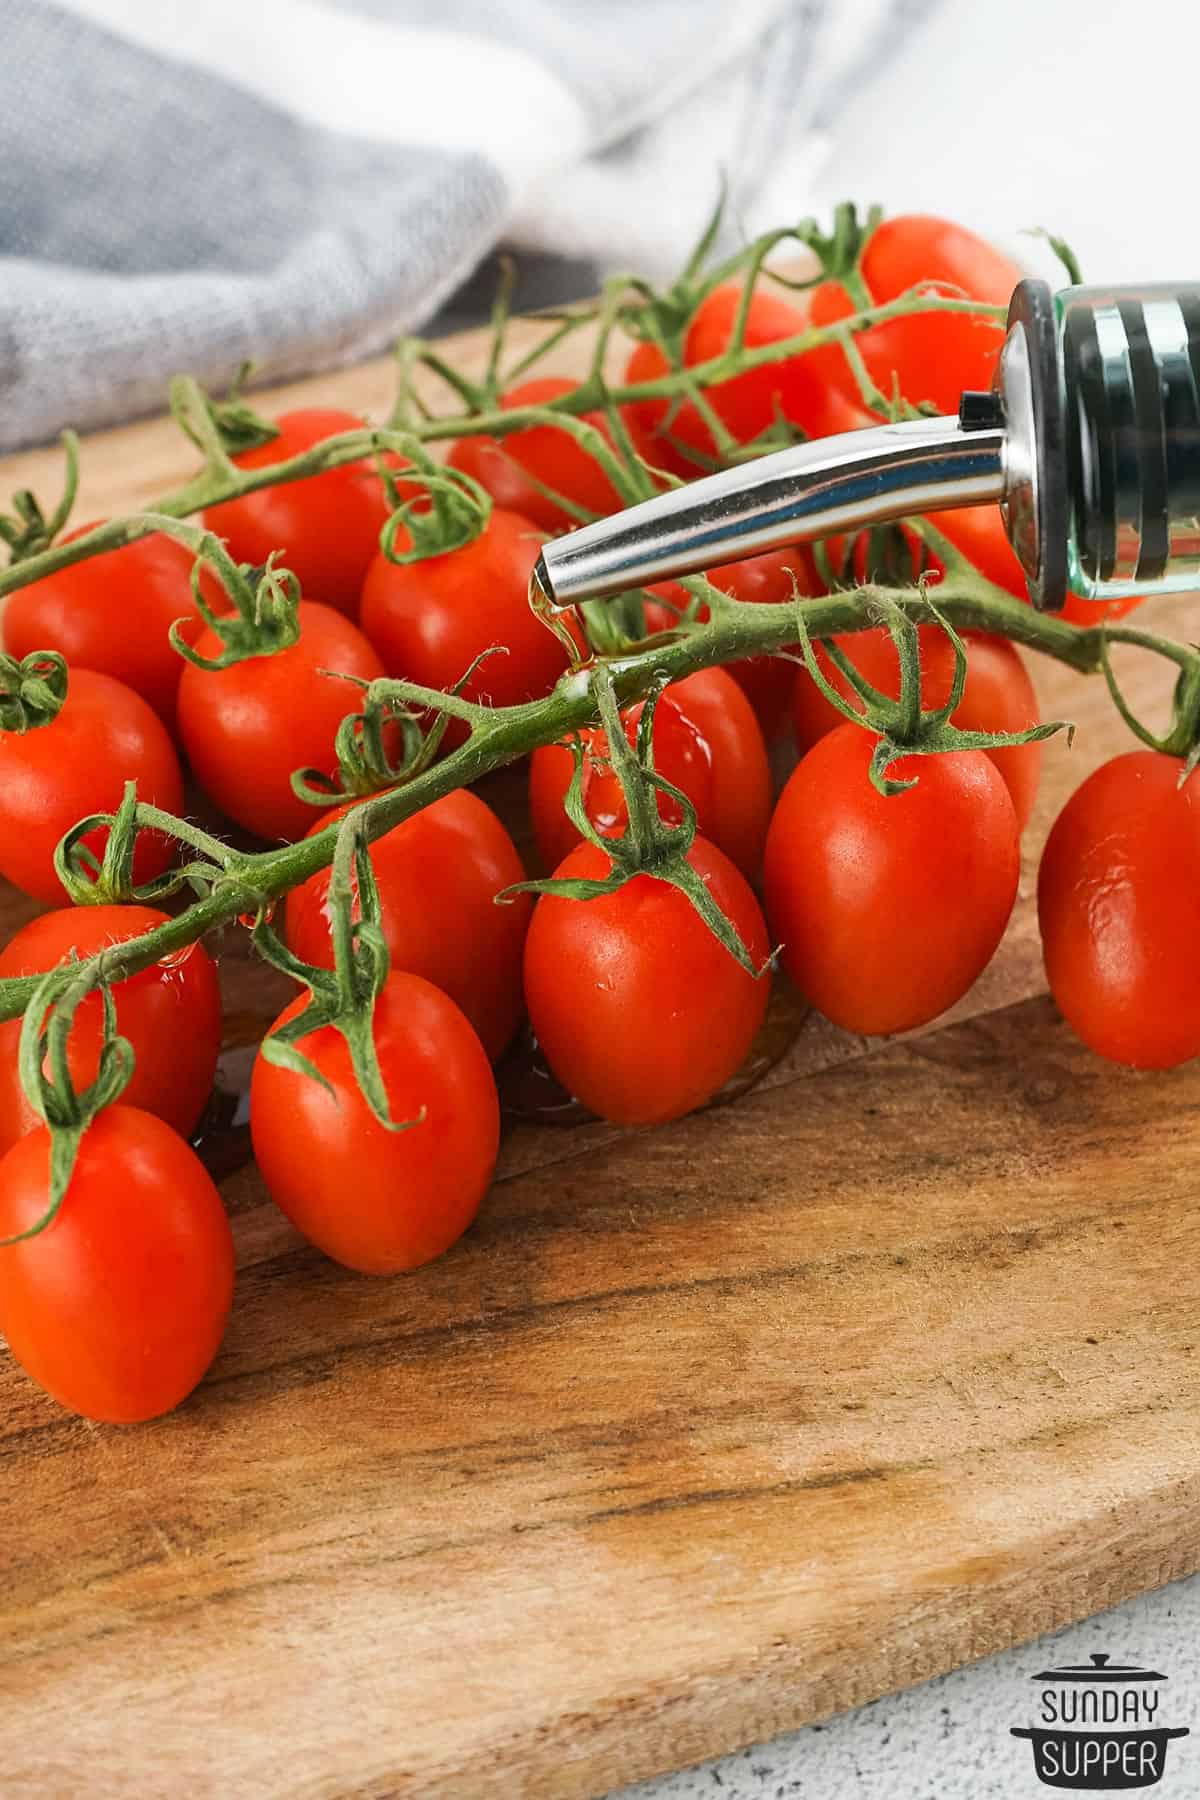 oil being poured on the vine tomatoes